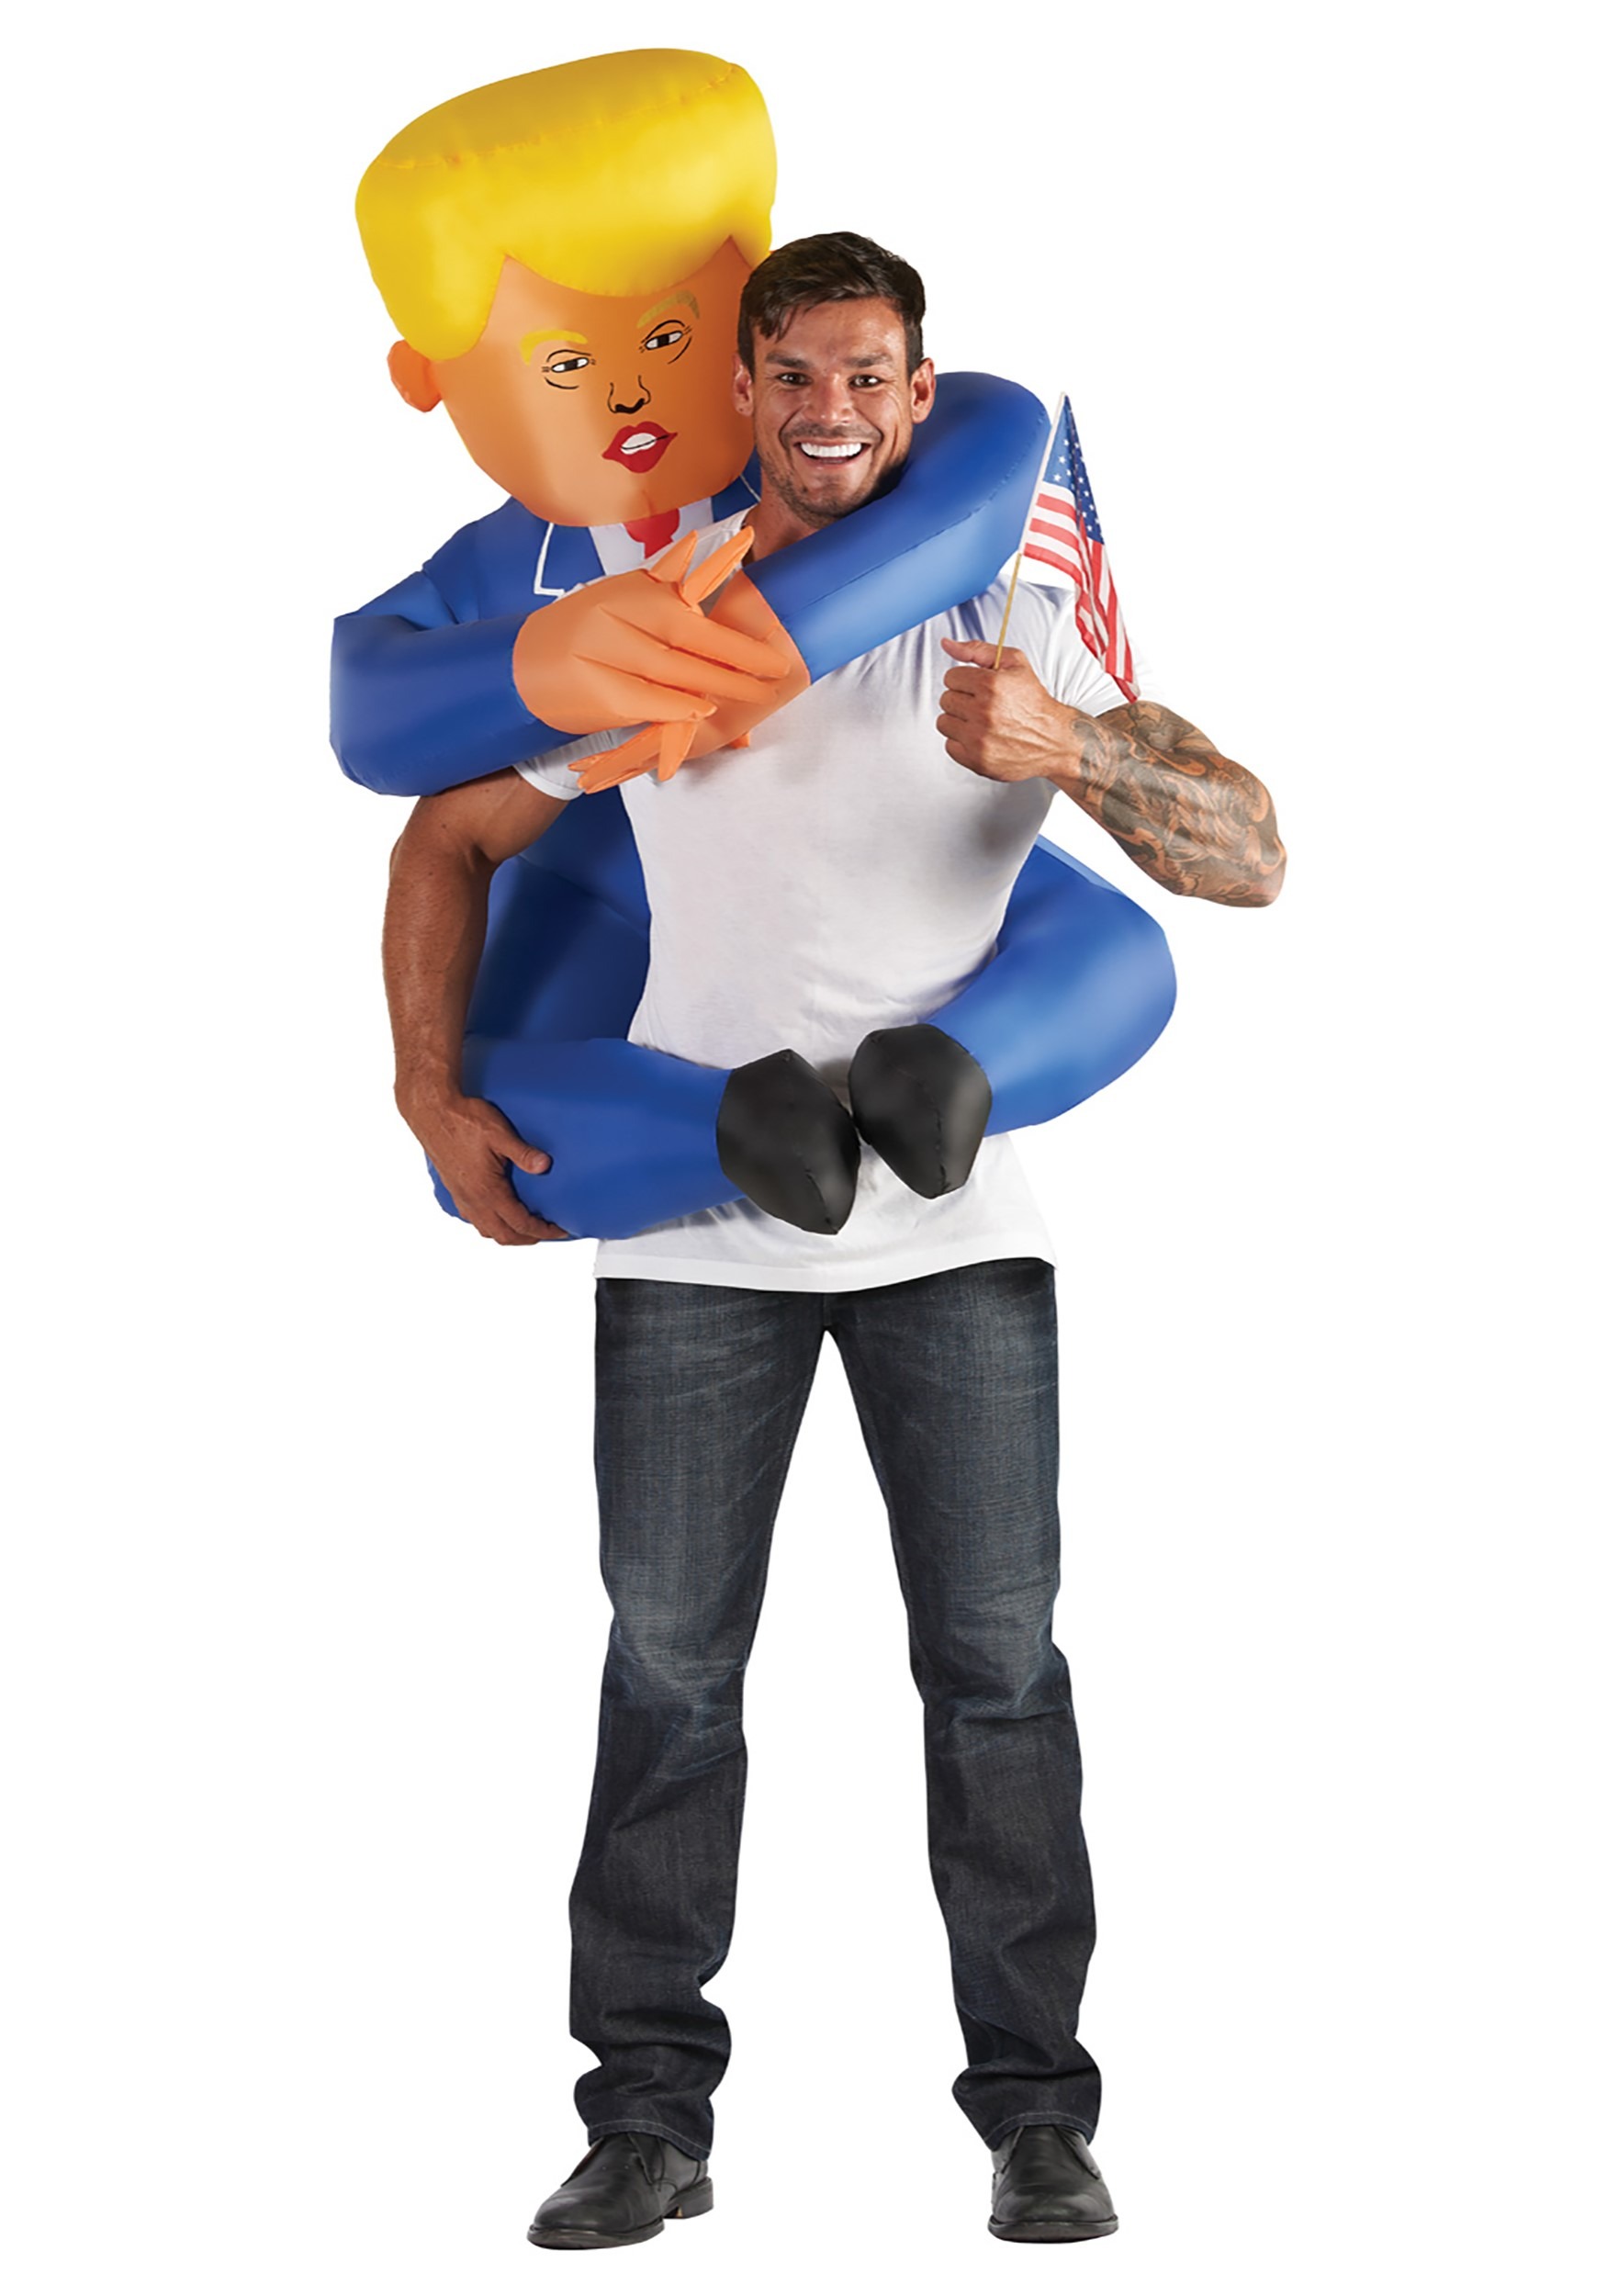 https://images.halloweencostumes.ca/products/67351/1-1/adult-inflatable-presidential-hugger-mugger-costume.jpg